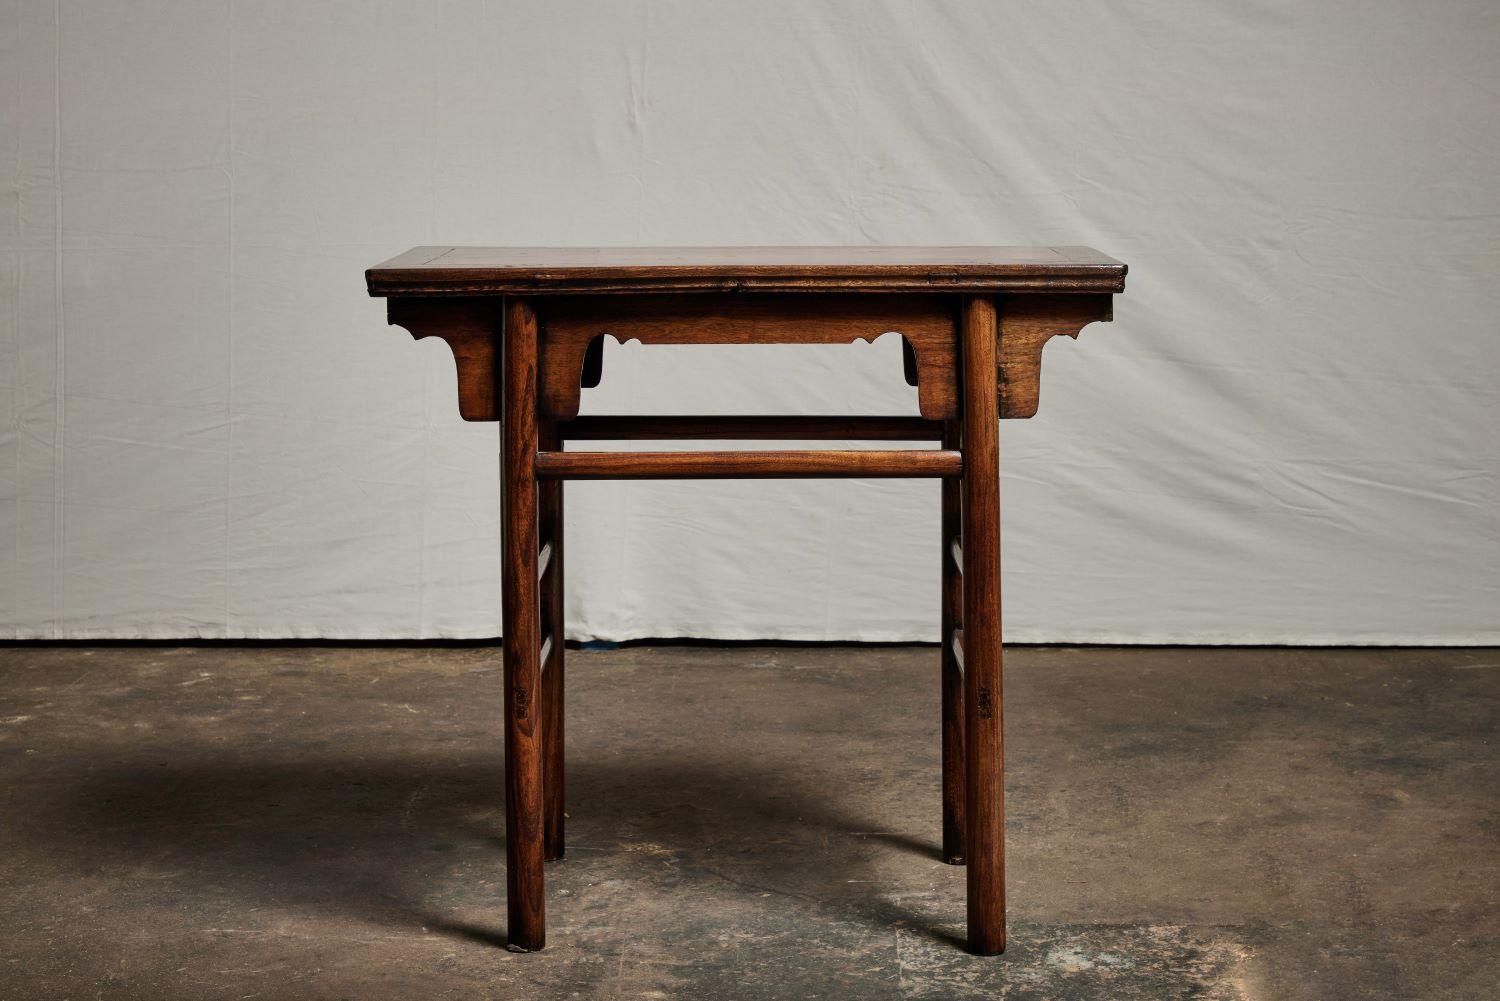 Ming style small Chinese altar table from the 19th century.